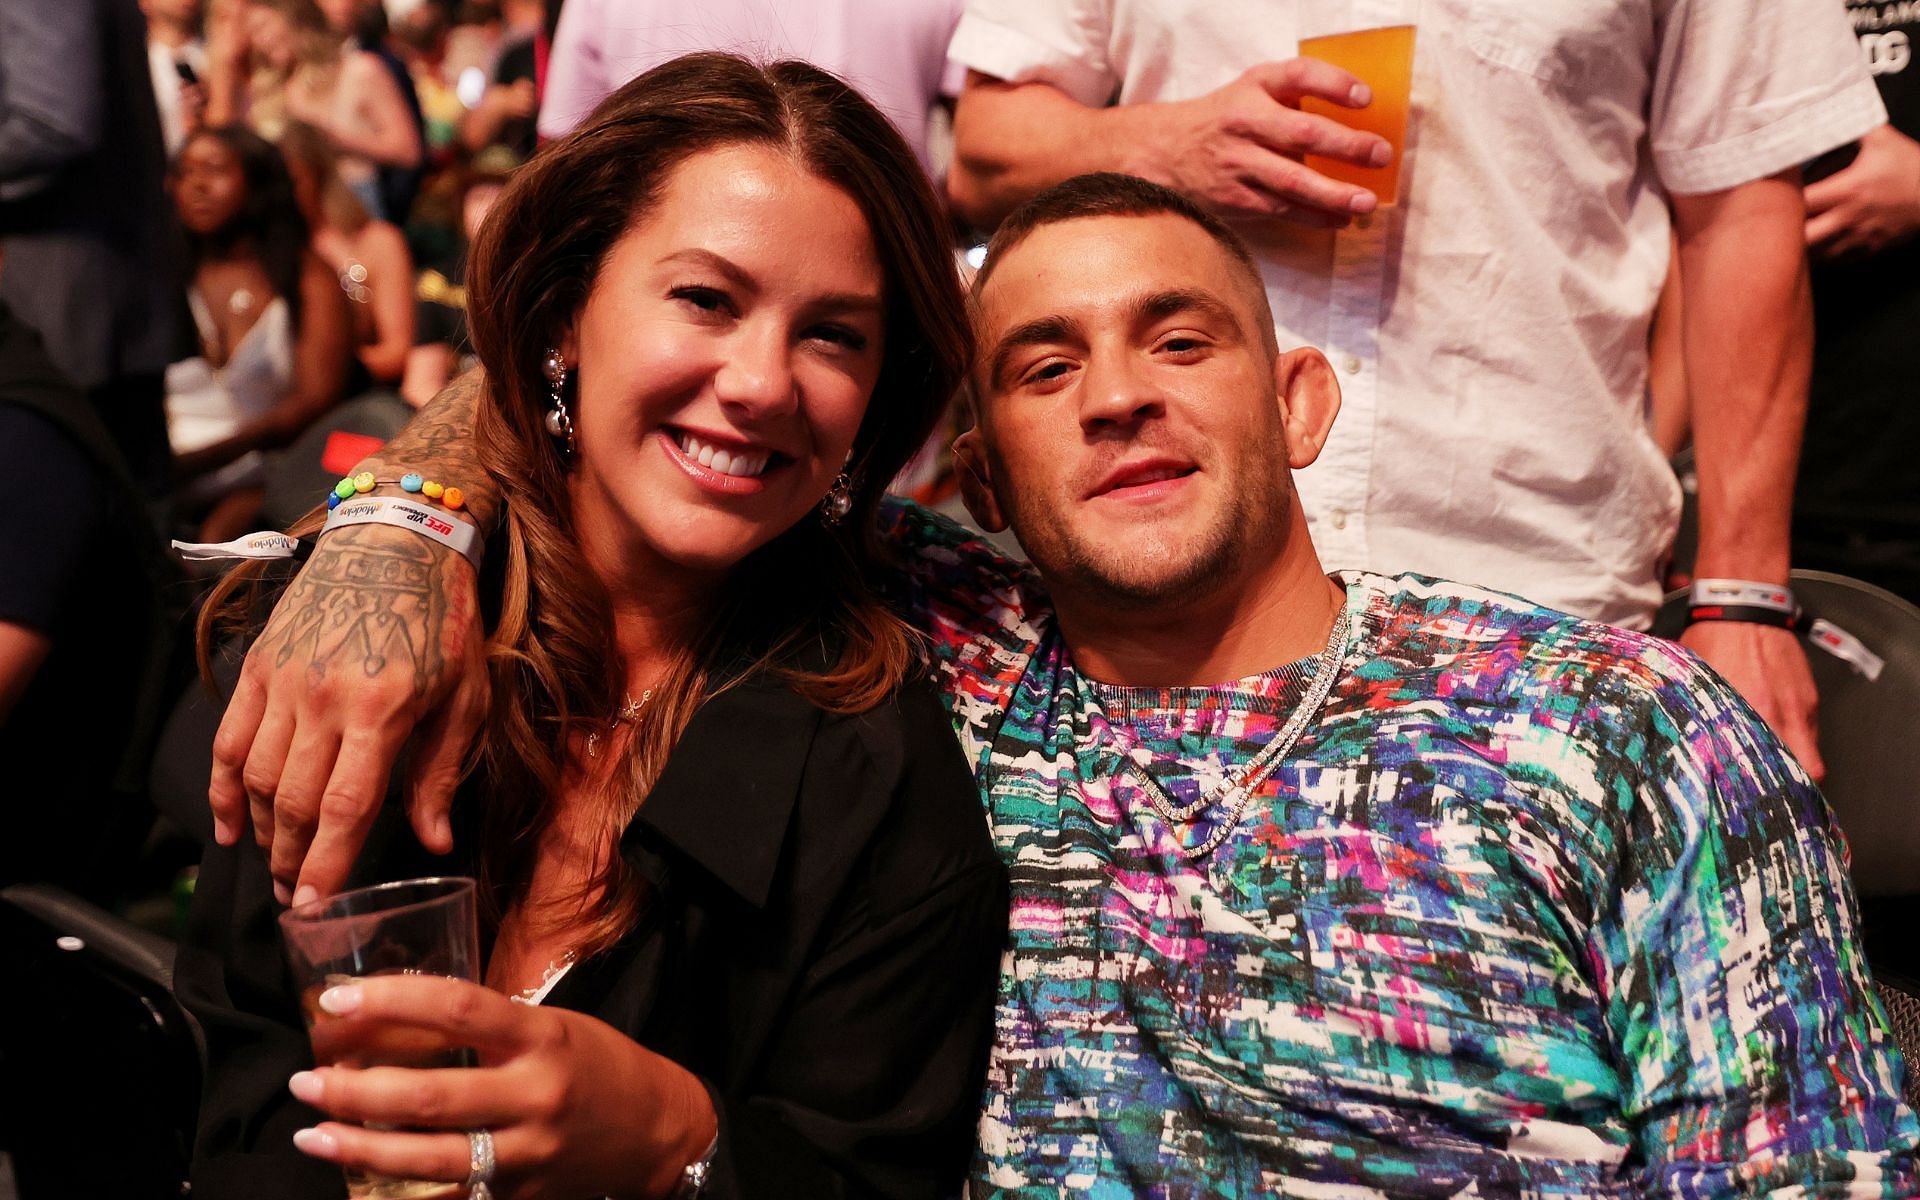 Dustin Poirier [right] and his wife [left] at UFC 276 